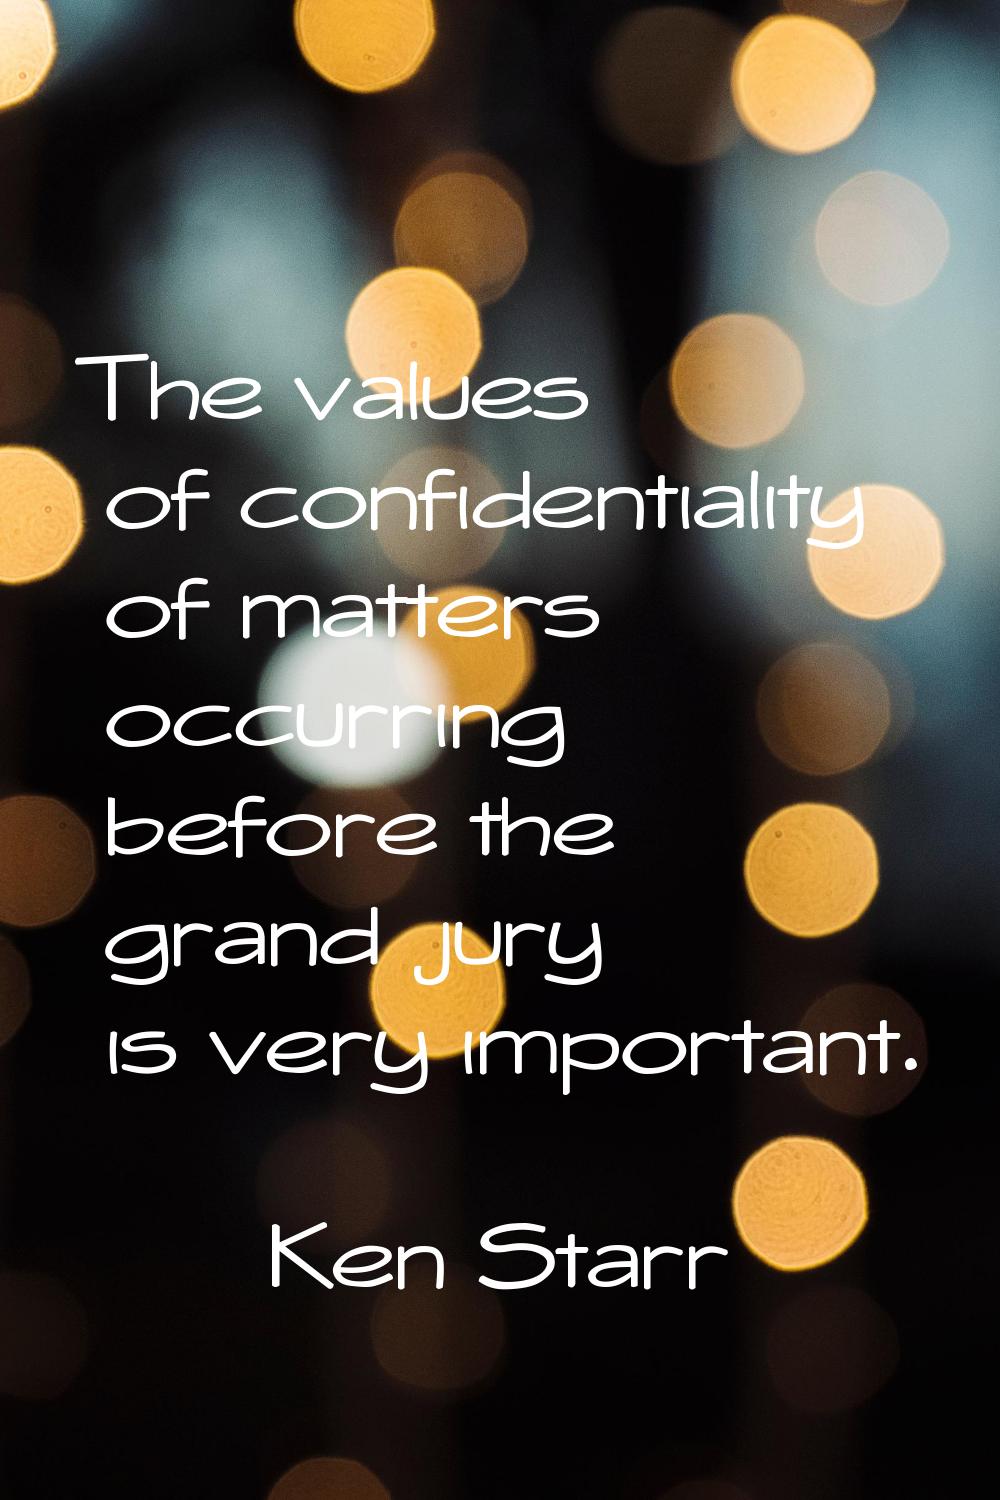 The values of confidentiality of matters occurring before the grand jury is very important.